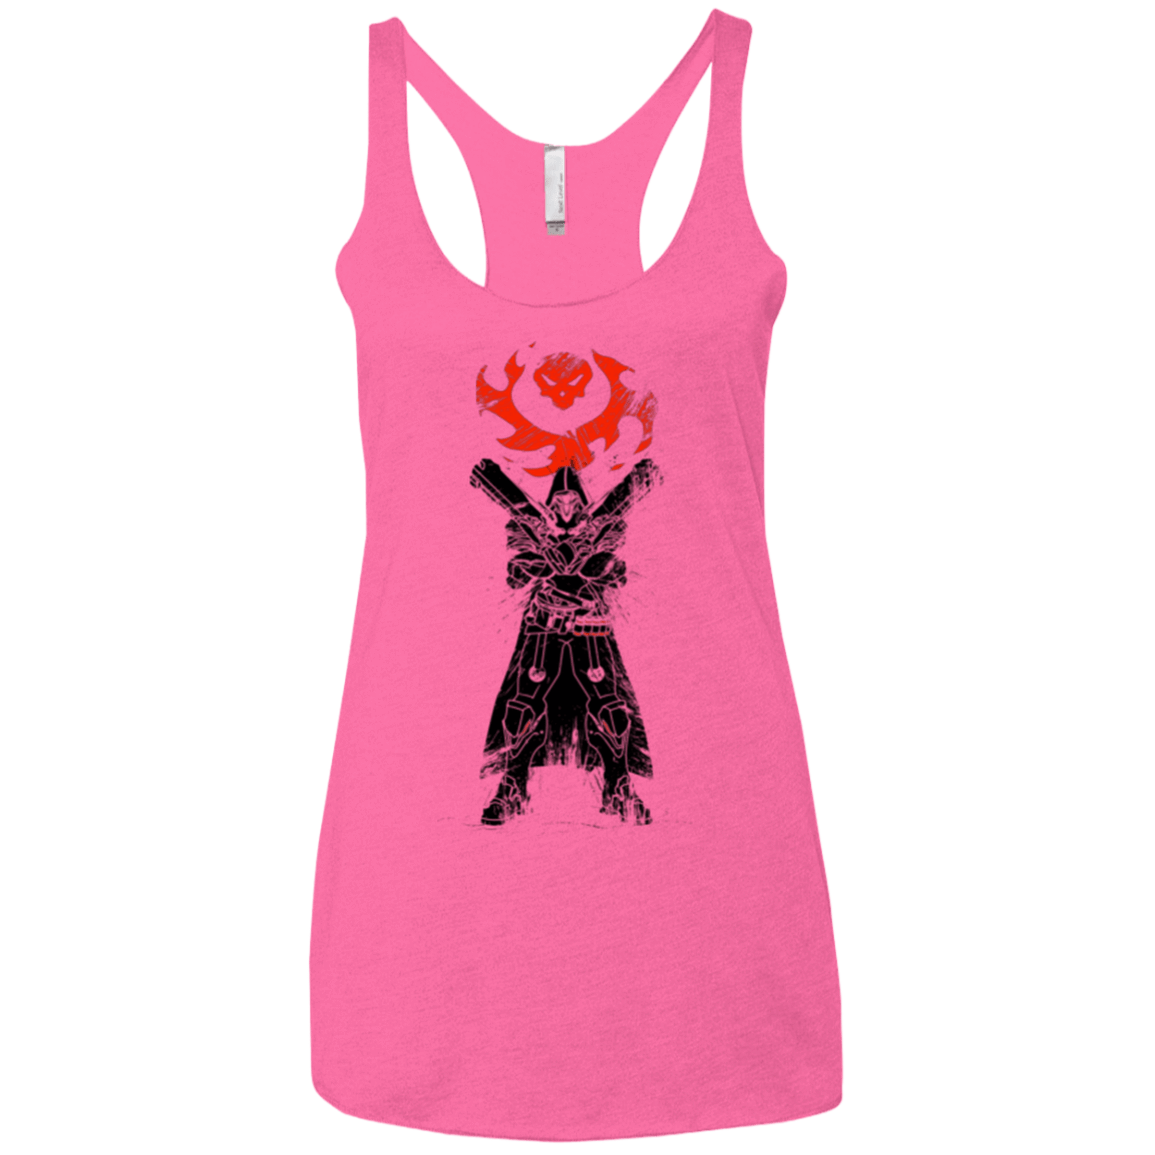 T-Shirts Vintage Pink / X-Small TRADITIONAL REAPER Women's Triblend Racerback Tank